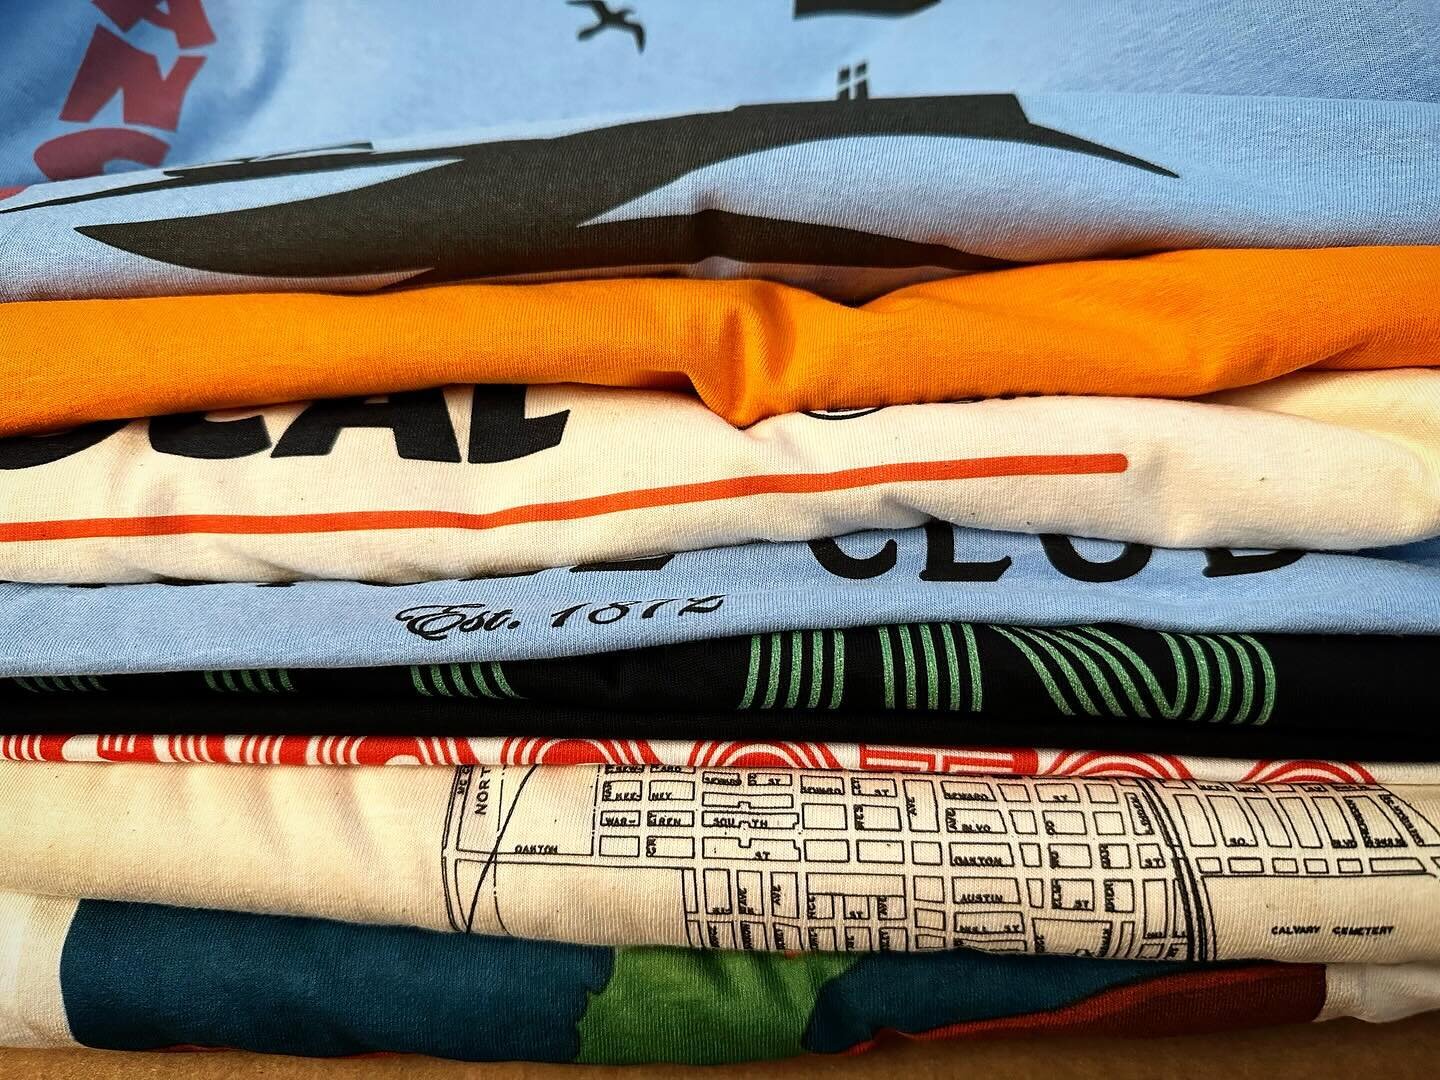 .
Grip of Evanston Tees 
.
Get yourself to @squeezeboxbooks for some awesome records, books and more &hellip;. Including some @goahead_merch tees.
.
#evanston #tshirt #tshirtprinting #tshirtdesign #books #records #smallbusiness